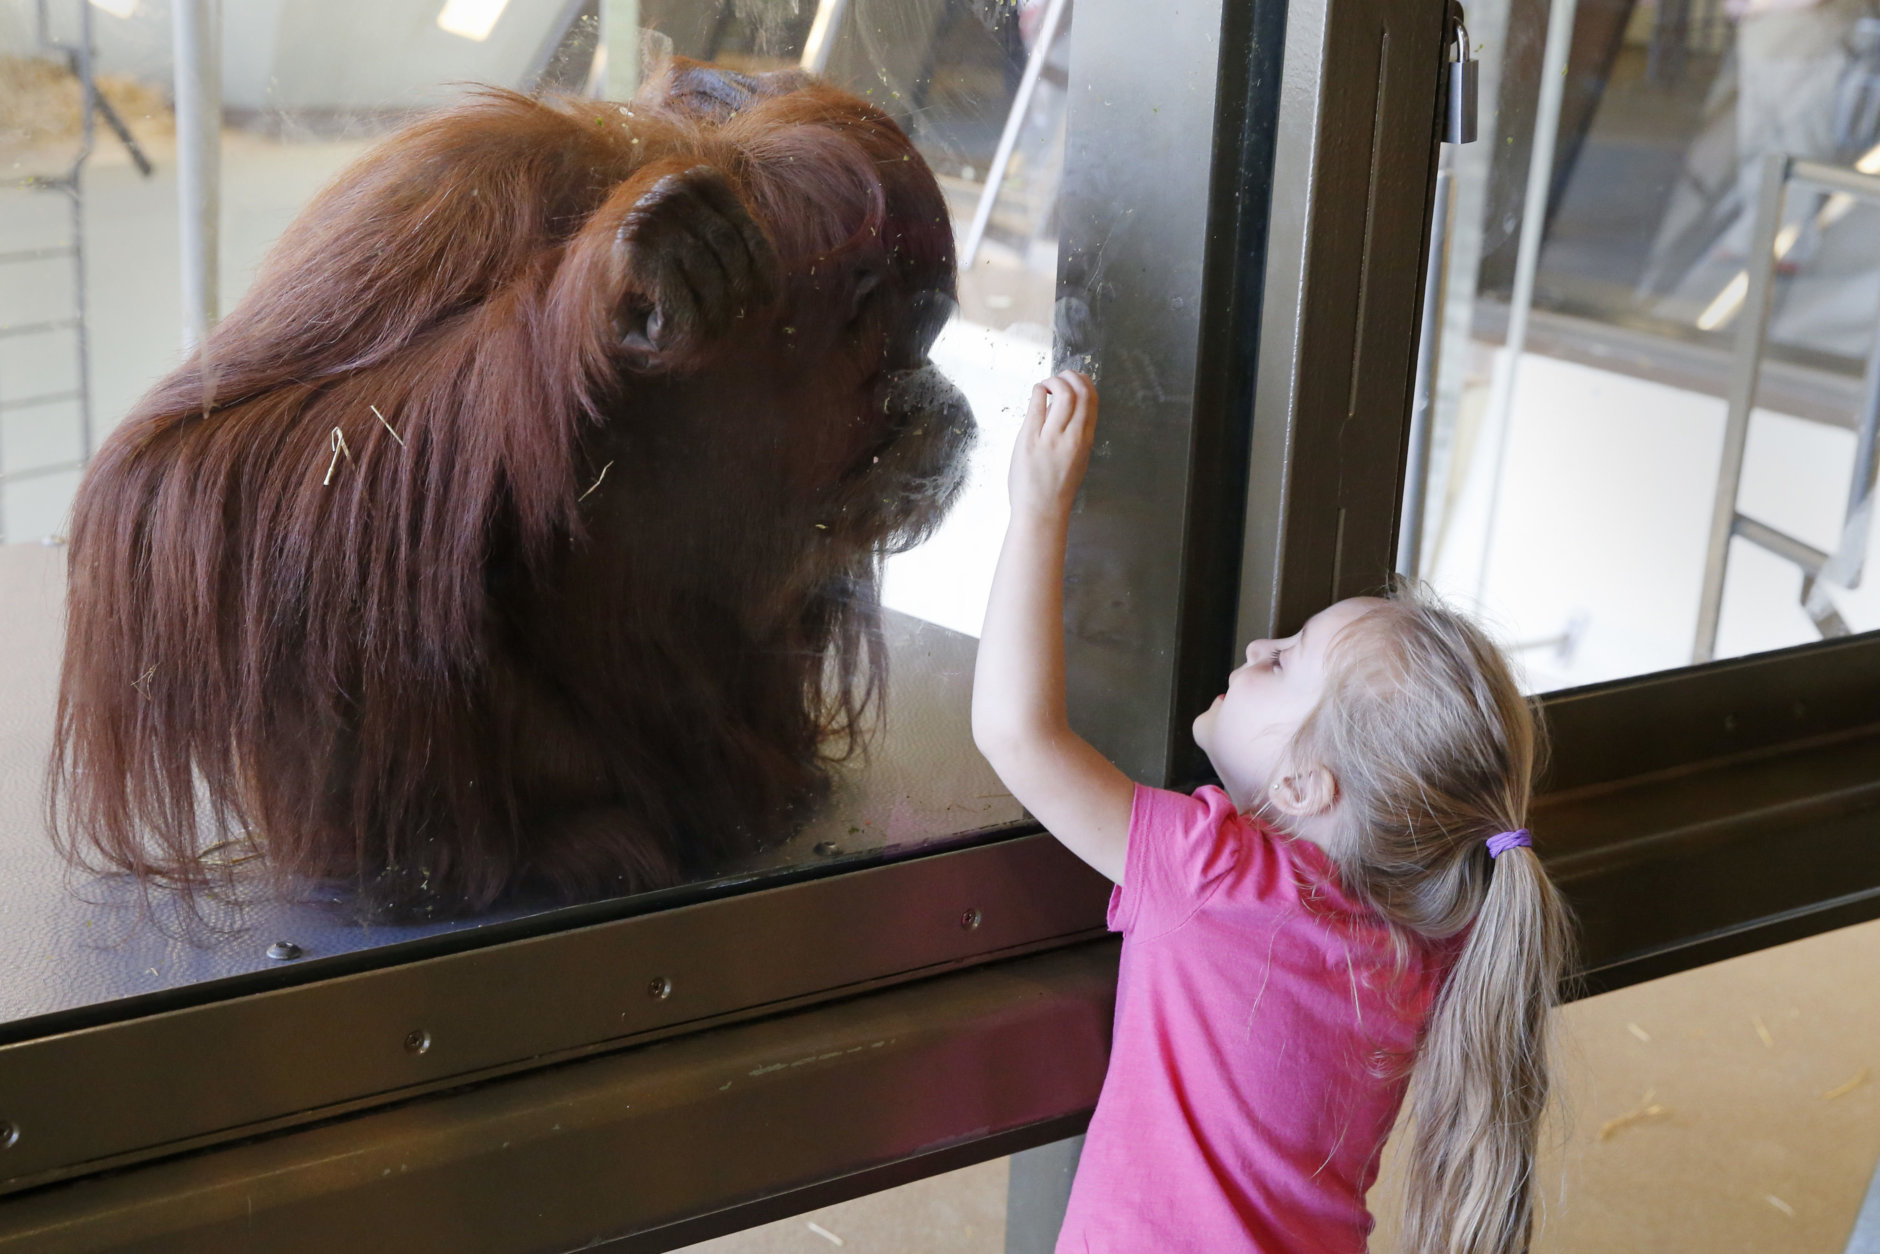 In this Friday, May 6, 2016, photo, a visitor to the Indianapolis Zoo's International Orangutan Center gestures to Katy, one of the center's orangutans, in Indianapolis. The zoo started using dynamic pricing in 2014, using software by Digonex. It was a way to prevent overcrowding before the opening of the zoo's popular orangutan exhibit. (AP Photo/Michael Conroy)